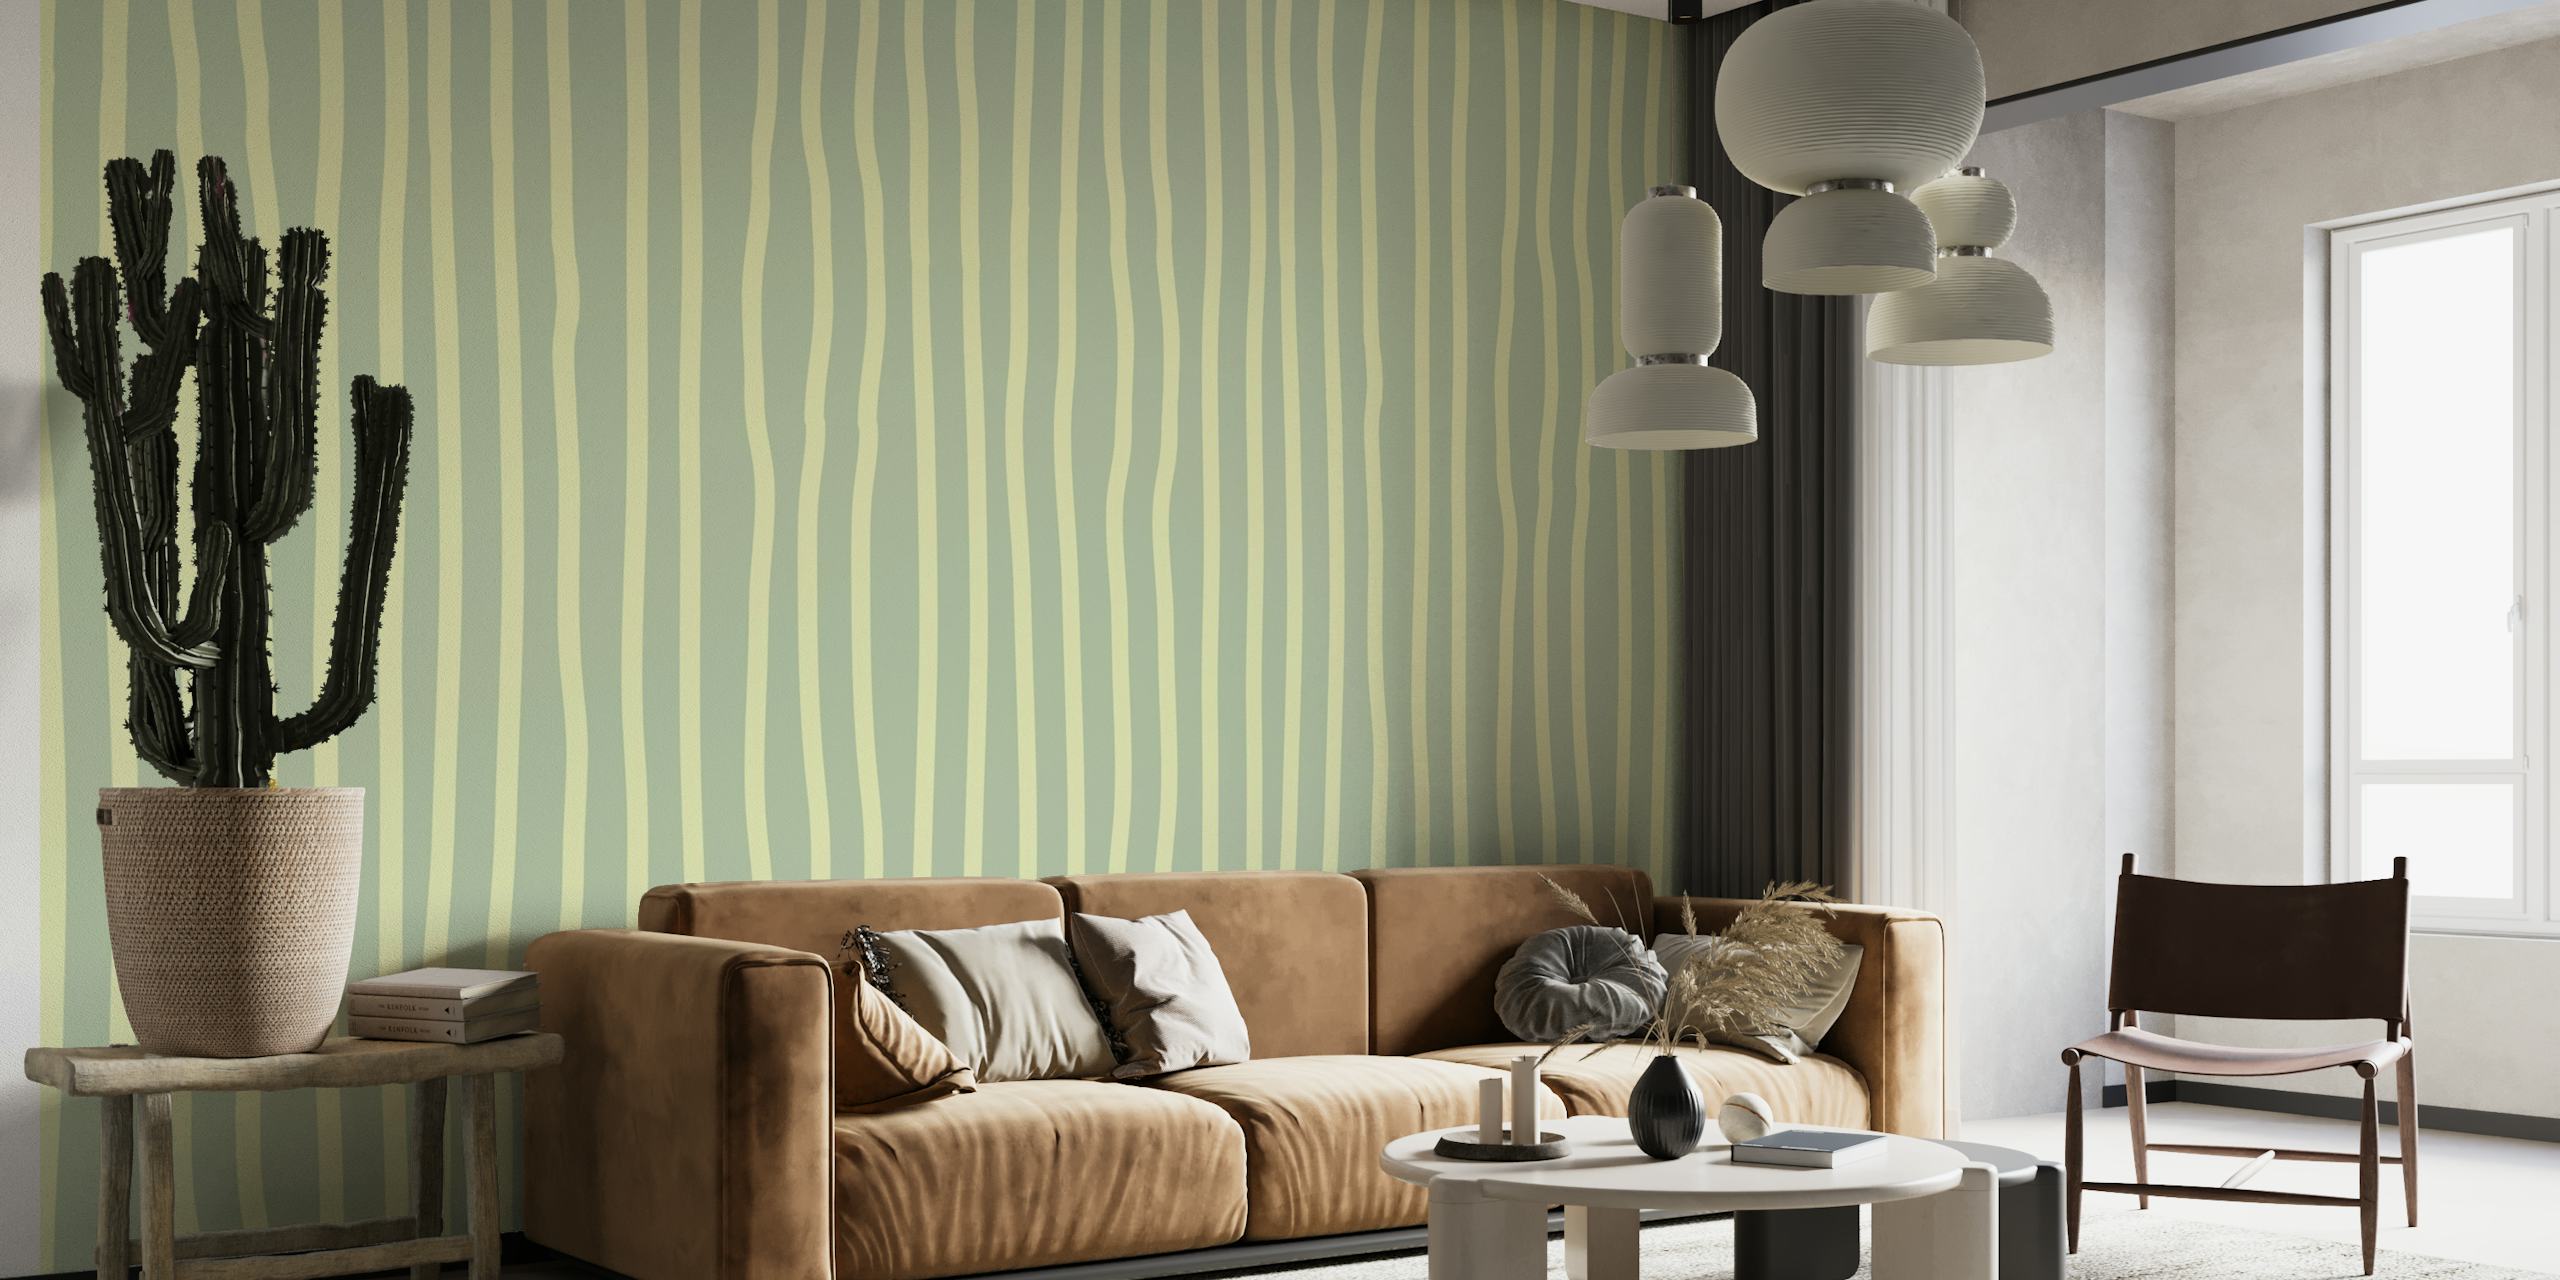 Minimalistic Pin Stripes Sage Green And Beige behang